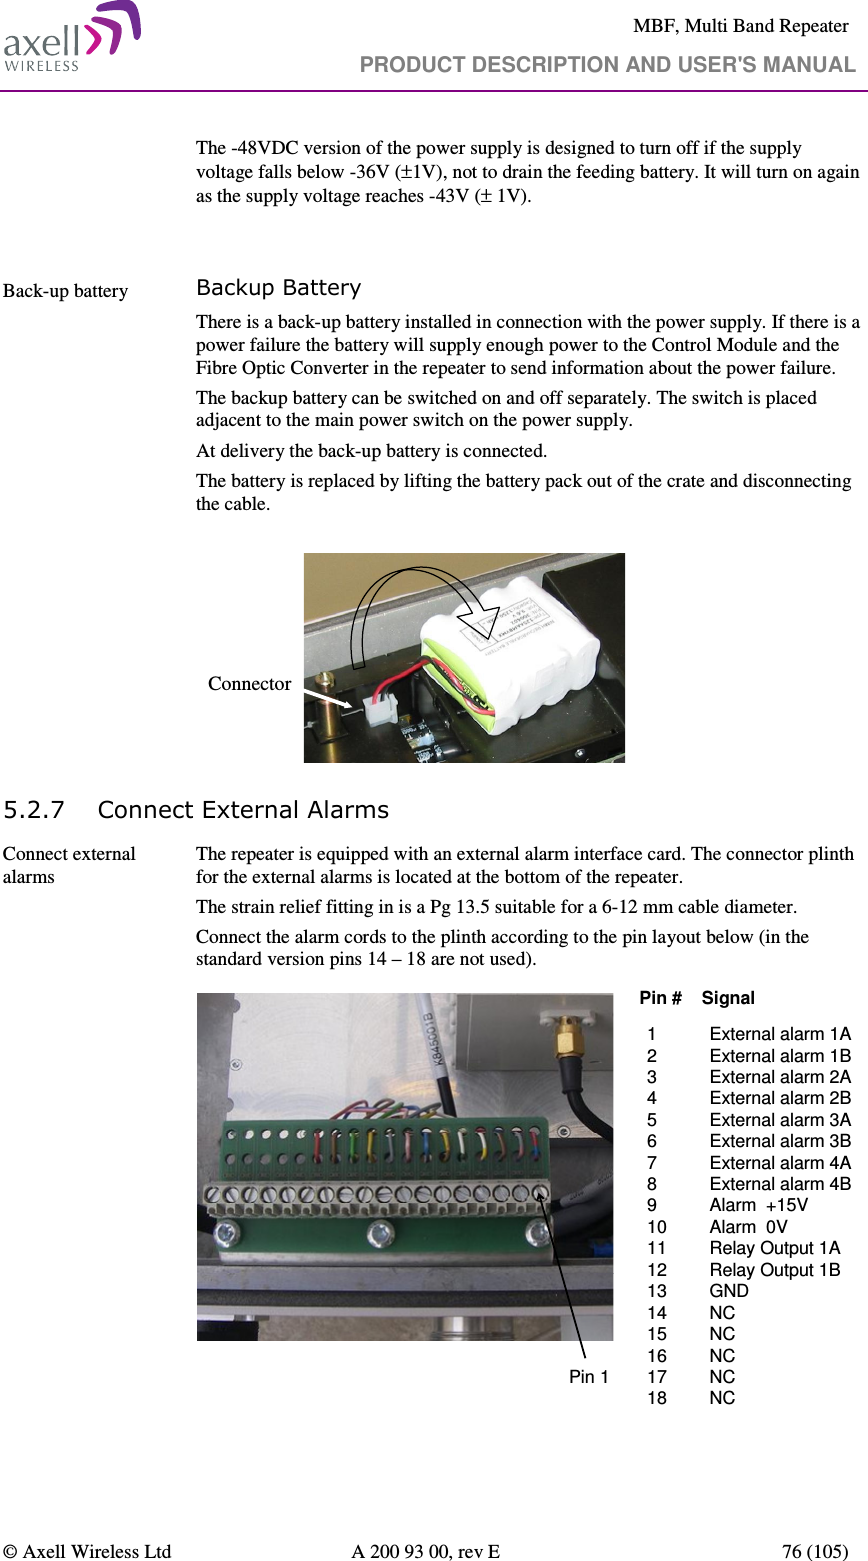     MBF, Multi Band Repeater                                     PRODUCT DESCRIPTION AND USER&apos;S MANUAL   © Axell Wireless Ltd  A 200 93 00, rev E  76 (105)  The -48VDC version of the power supply is designed to turn off if the supply voltage falls below -36V (±1V), not to drain the feeding battery. It will turn on again as the supply voltage reaches -43V (± 1V).   Back-up battery   Backup Battery There is a back-up battery installed in connection with the power supply. If there is a power failure the battery will supply enough power to the Control Module and the Fibre Optic Converter in the repeater to send information about the power failure. The backup battery can be switched on and off separately. The switch is placed adjacent to the main power switch on the power supply. At delivery the back-up battery is connected.  The battery is replaced by lifting the battery pack out of the crate and disconnecting the cable.  Connector 5.2.7 Connect External Alarms  Connect external alarms  The repeater is equipped with an external alarm interface card. The connector plinth for the external alarms is located at the bottom of the repeater.  The strain relief fitting in is a Pg 13.5 suitable for a 6-12 mm cable diameter. Connect the alarm cords to the plinth according to the pin layout below (in the standard version pins 14 – 18 are not used).  1 External alarm 1A 2 External alarm 1B3 External alarm 2A 4 External alarm 2B 5 External alarm 3A 6 External alarm 3B 7 External alarm 4A 8 External alarm 4B 9 Alarm  +15V 10 Alarm  0V 11 Relay Output 1A  12 Relay Output 1B13 GND14 NC15 NC16 NC17 NC18 NCPin #    SignalPin 1 